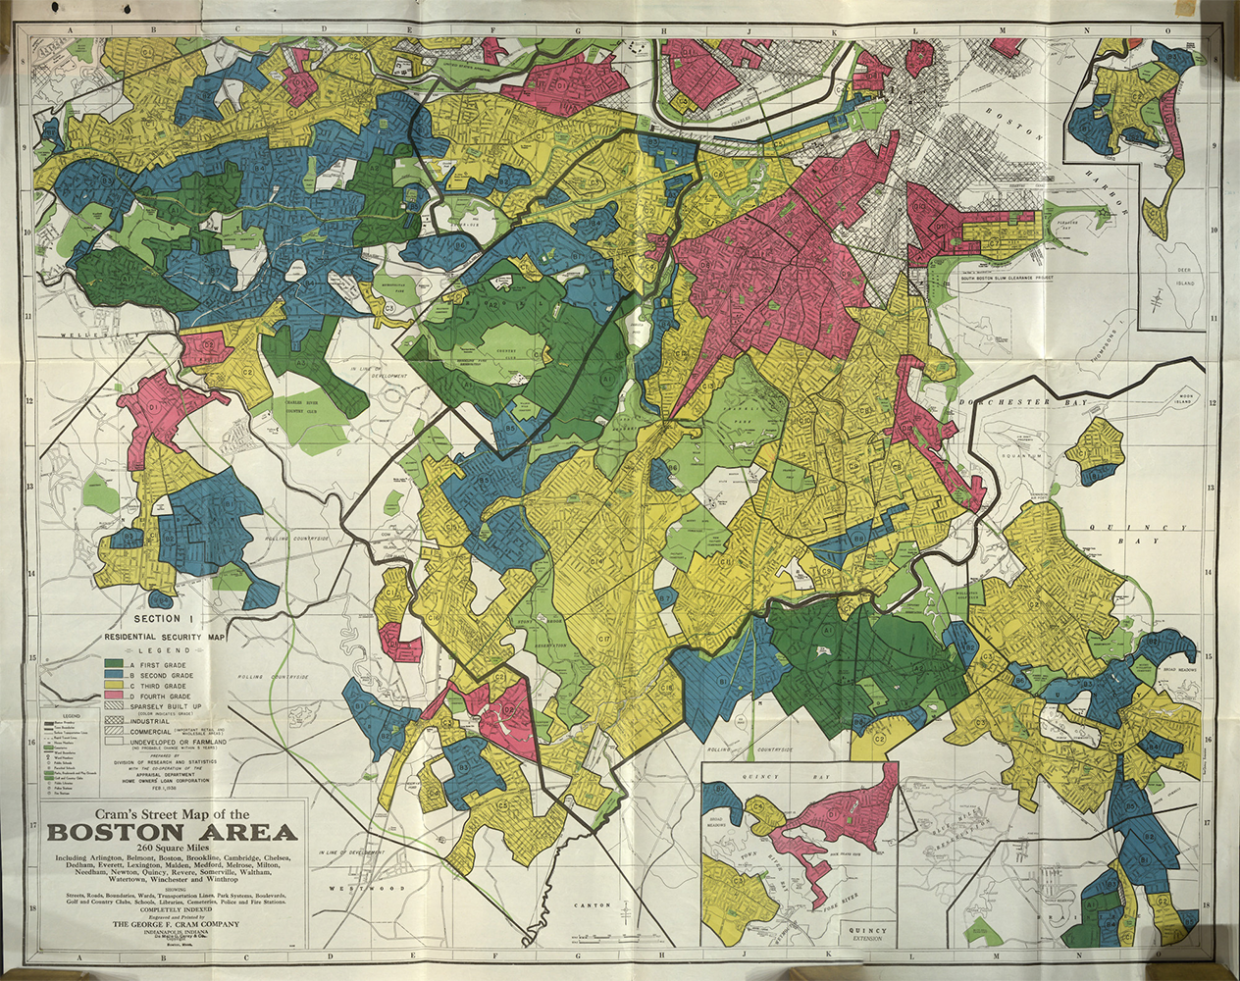 Map of Boston showing effects of historic redlining.